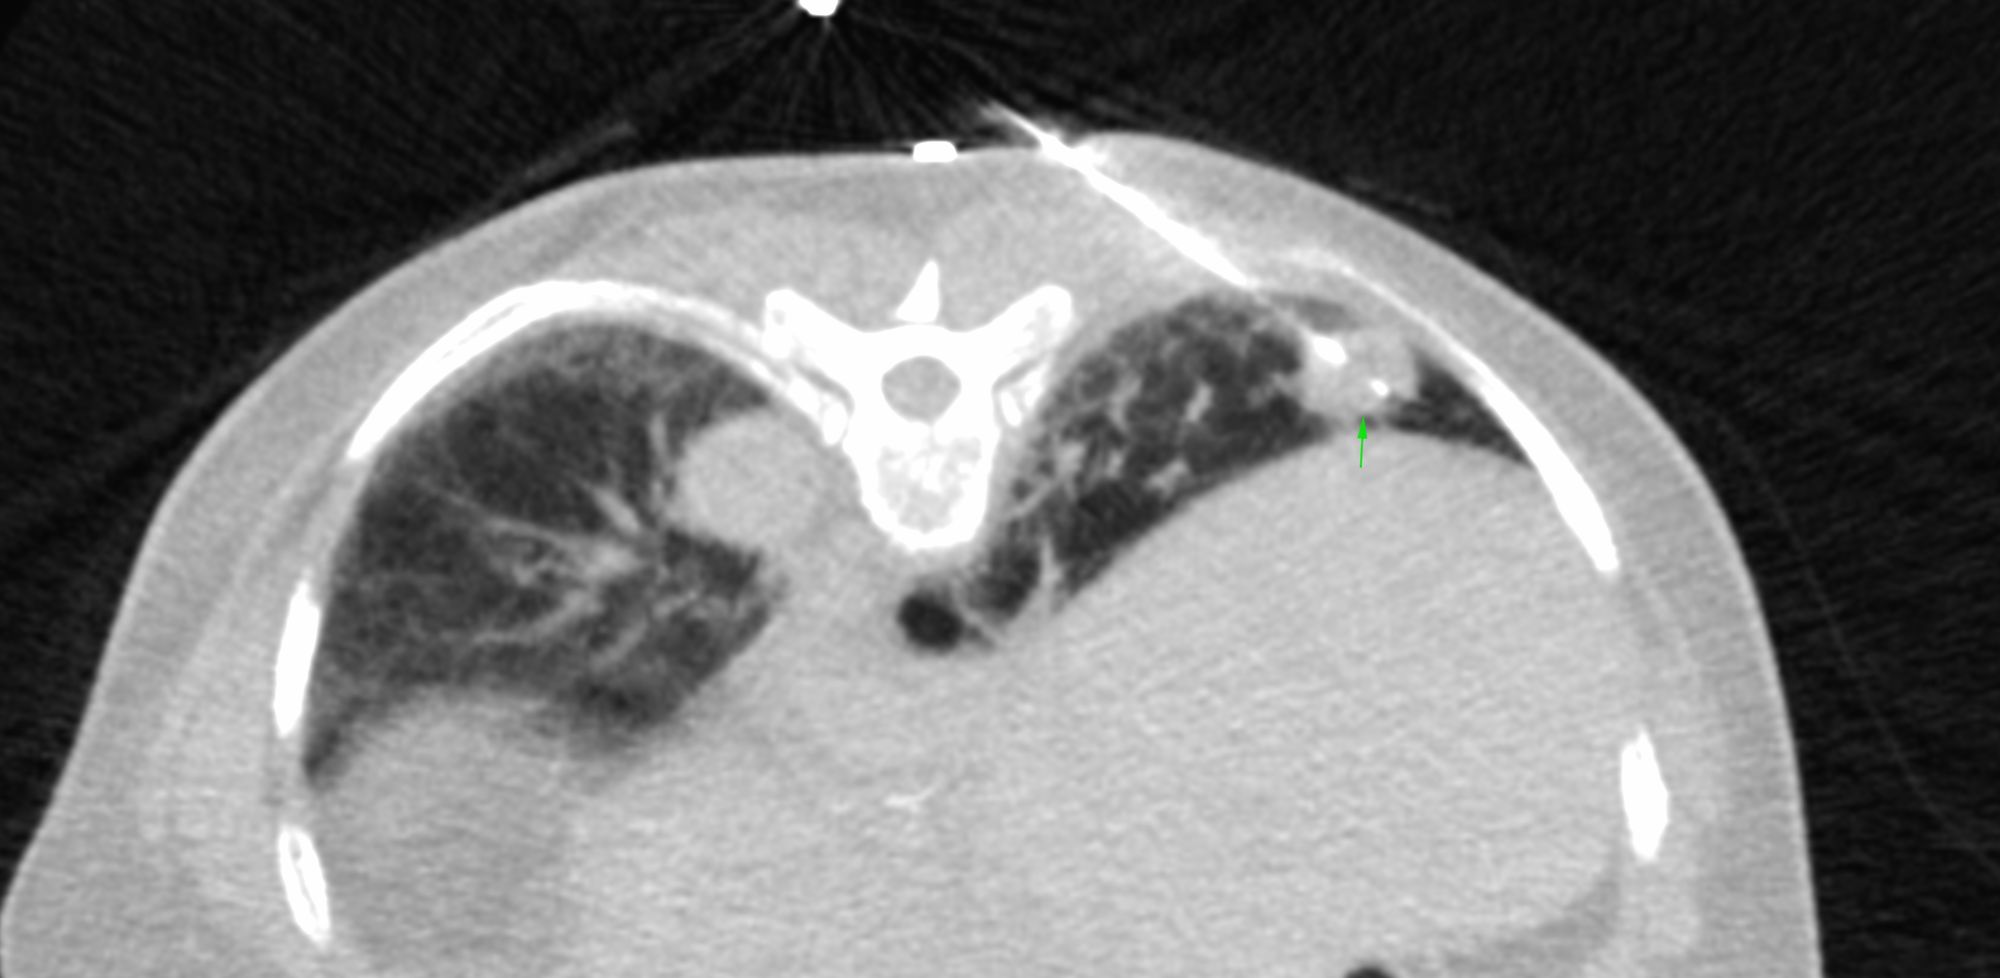 Case 15: UIP IPF with a Superimposed Lung Nodule